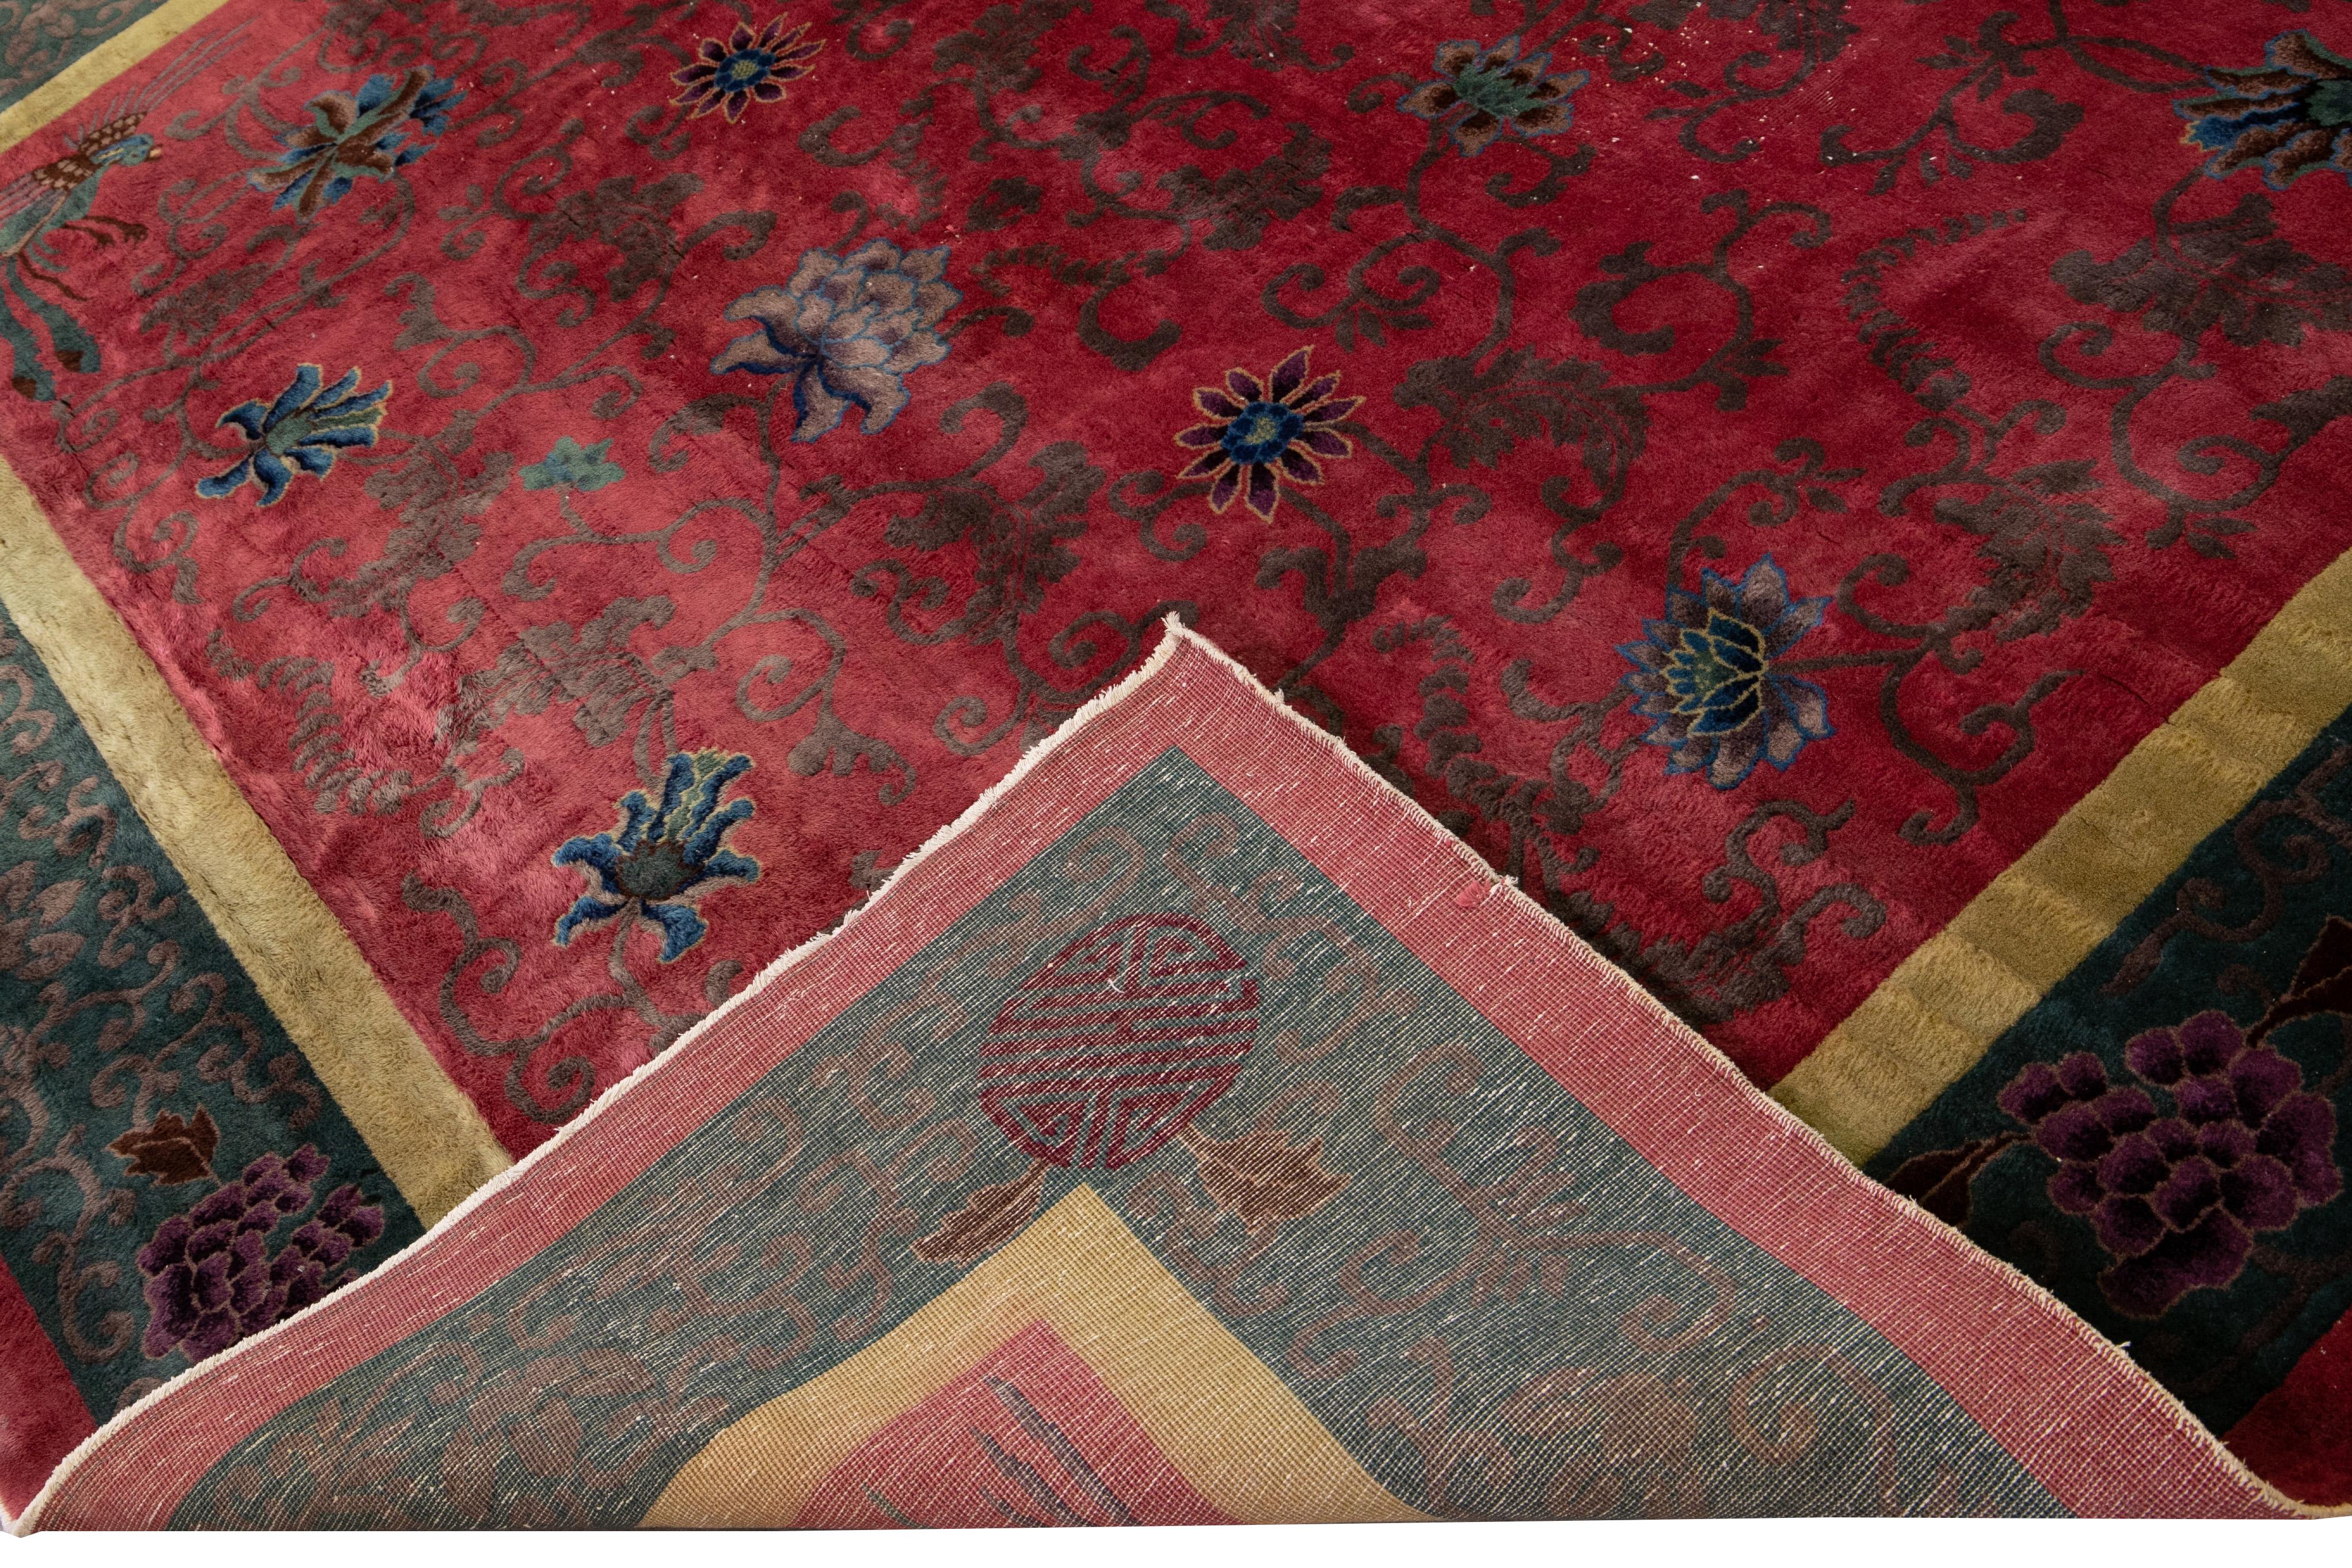 Beautiful antique Art Deco Chinese hand-knotted wool rug with a red field. This Chinese rug has a green and yellow frame multi-color accents in a gorgeous all-over traditional Chinese floral design. 

This rug measures: 10' x 17'5